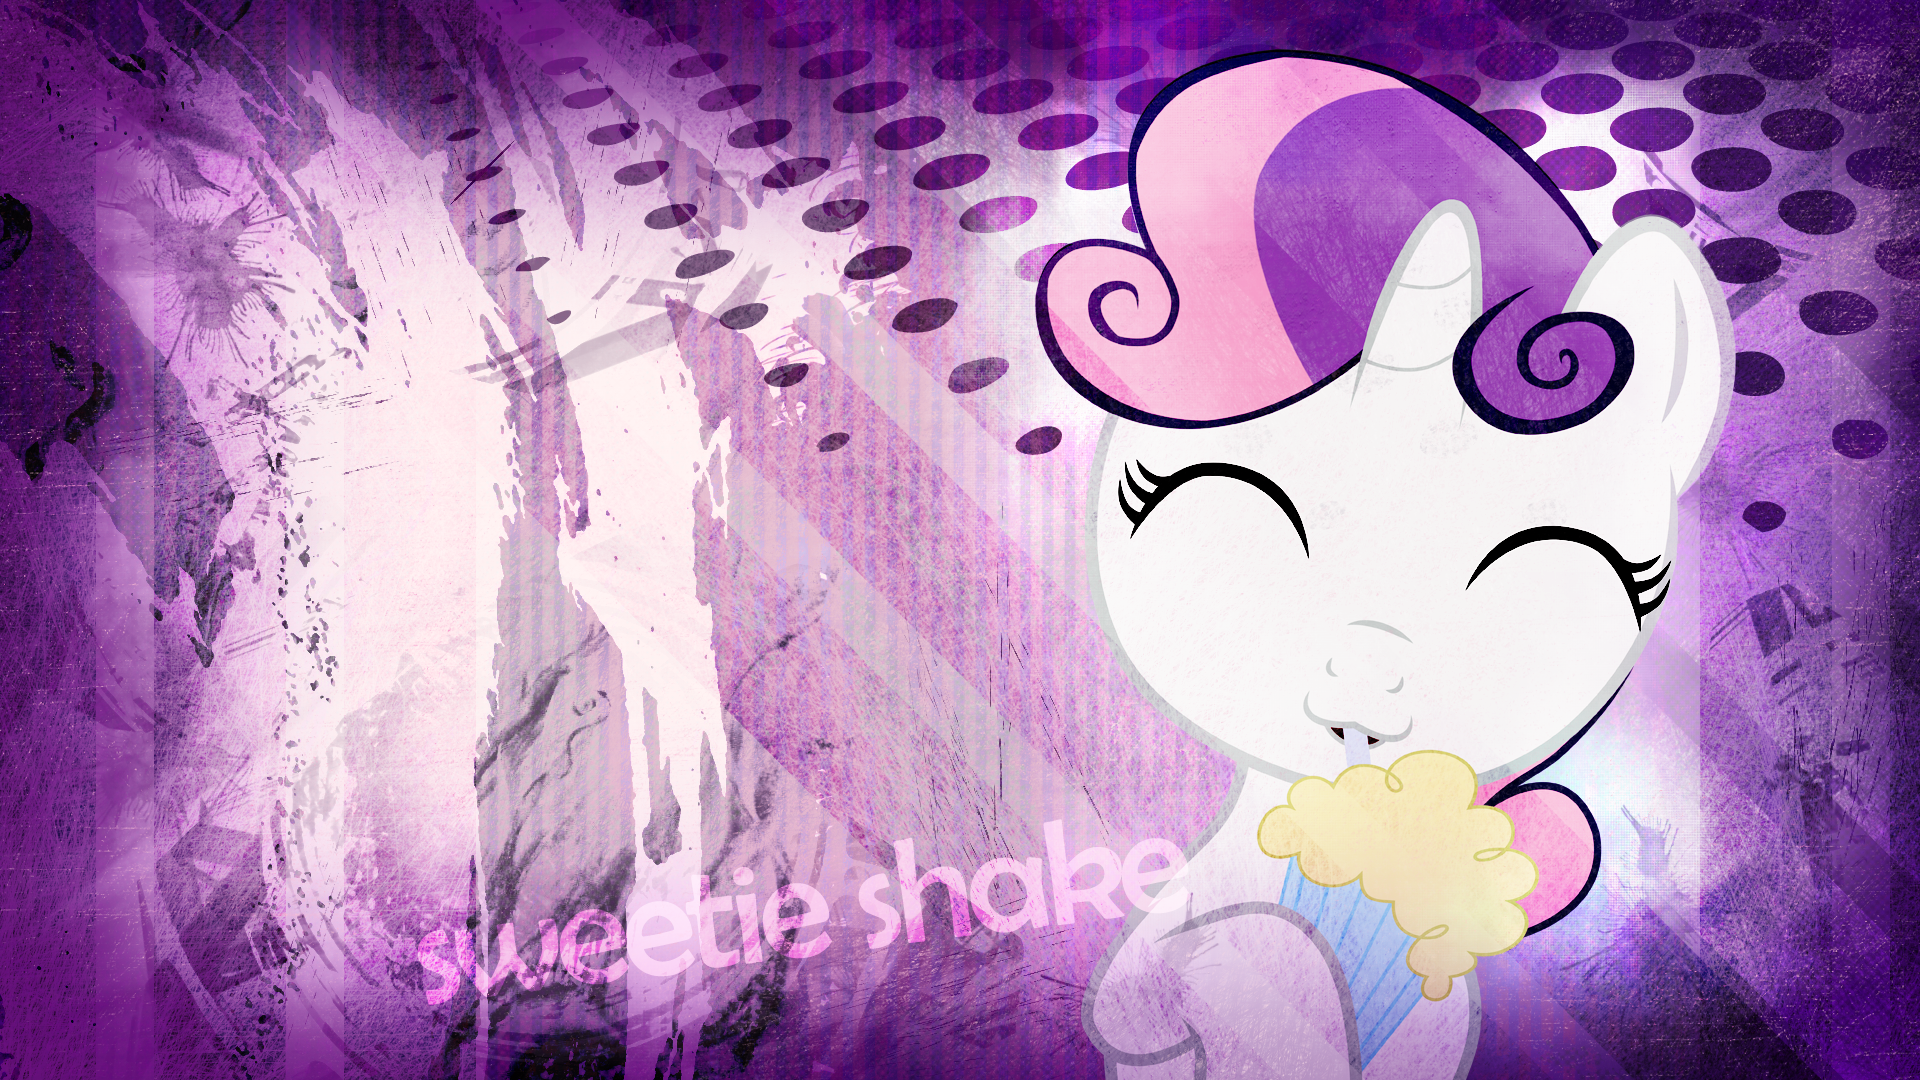 Sweetie Shake - Wallpaper by 3ight8it and Pony4444